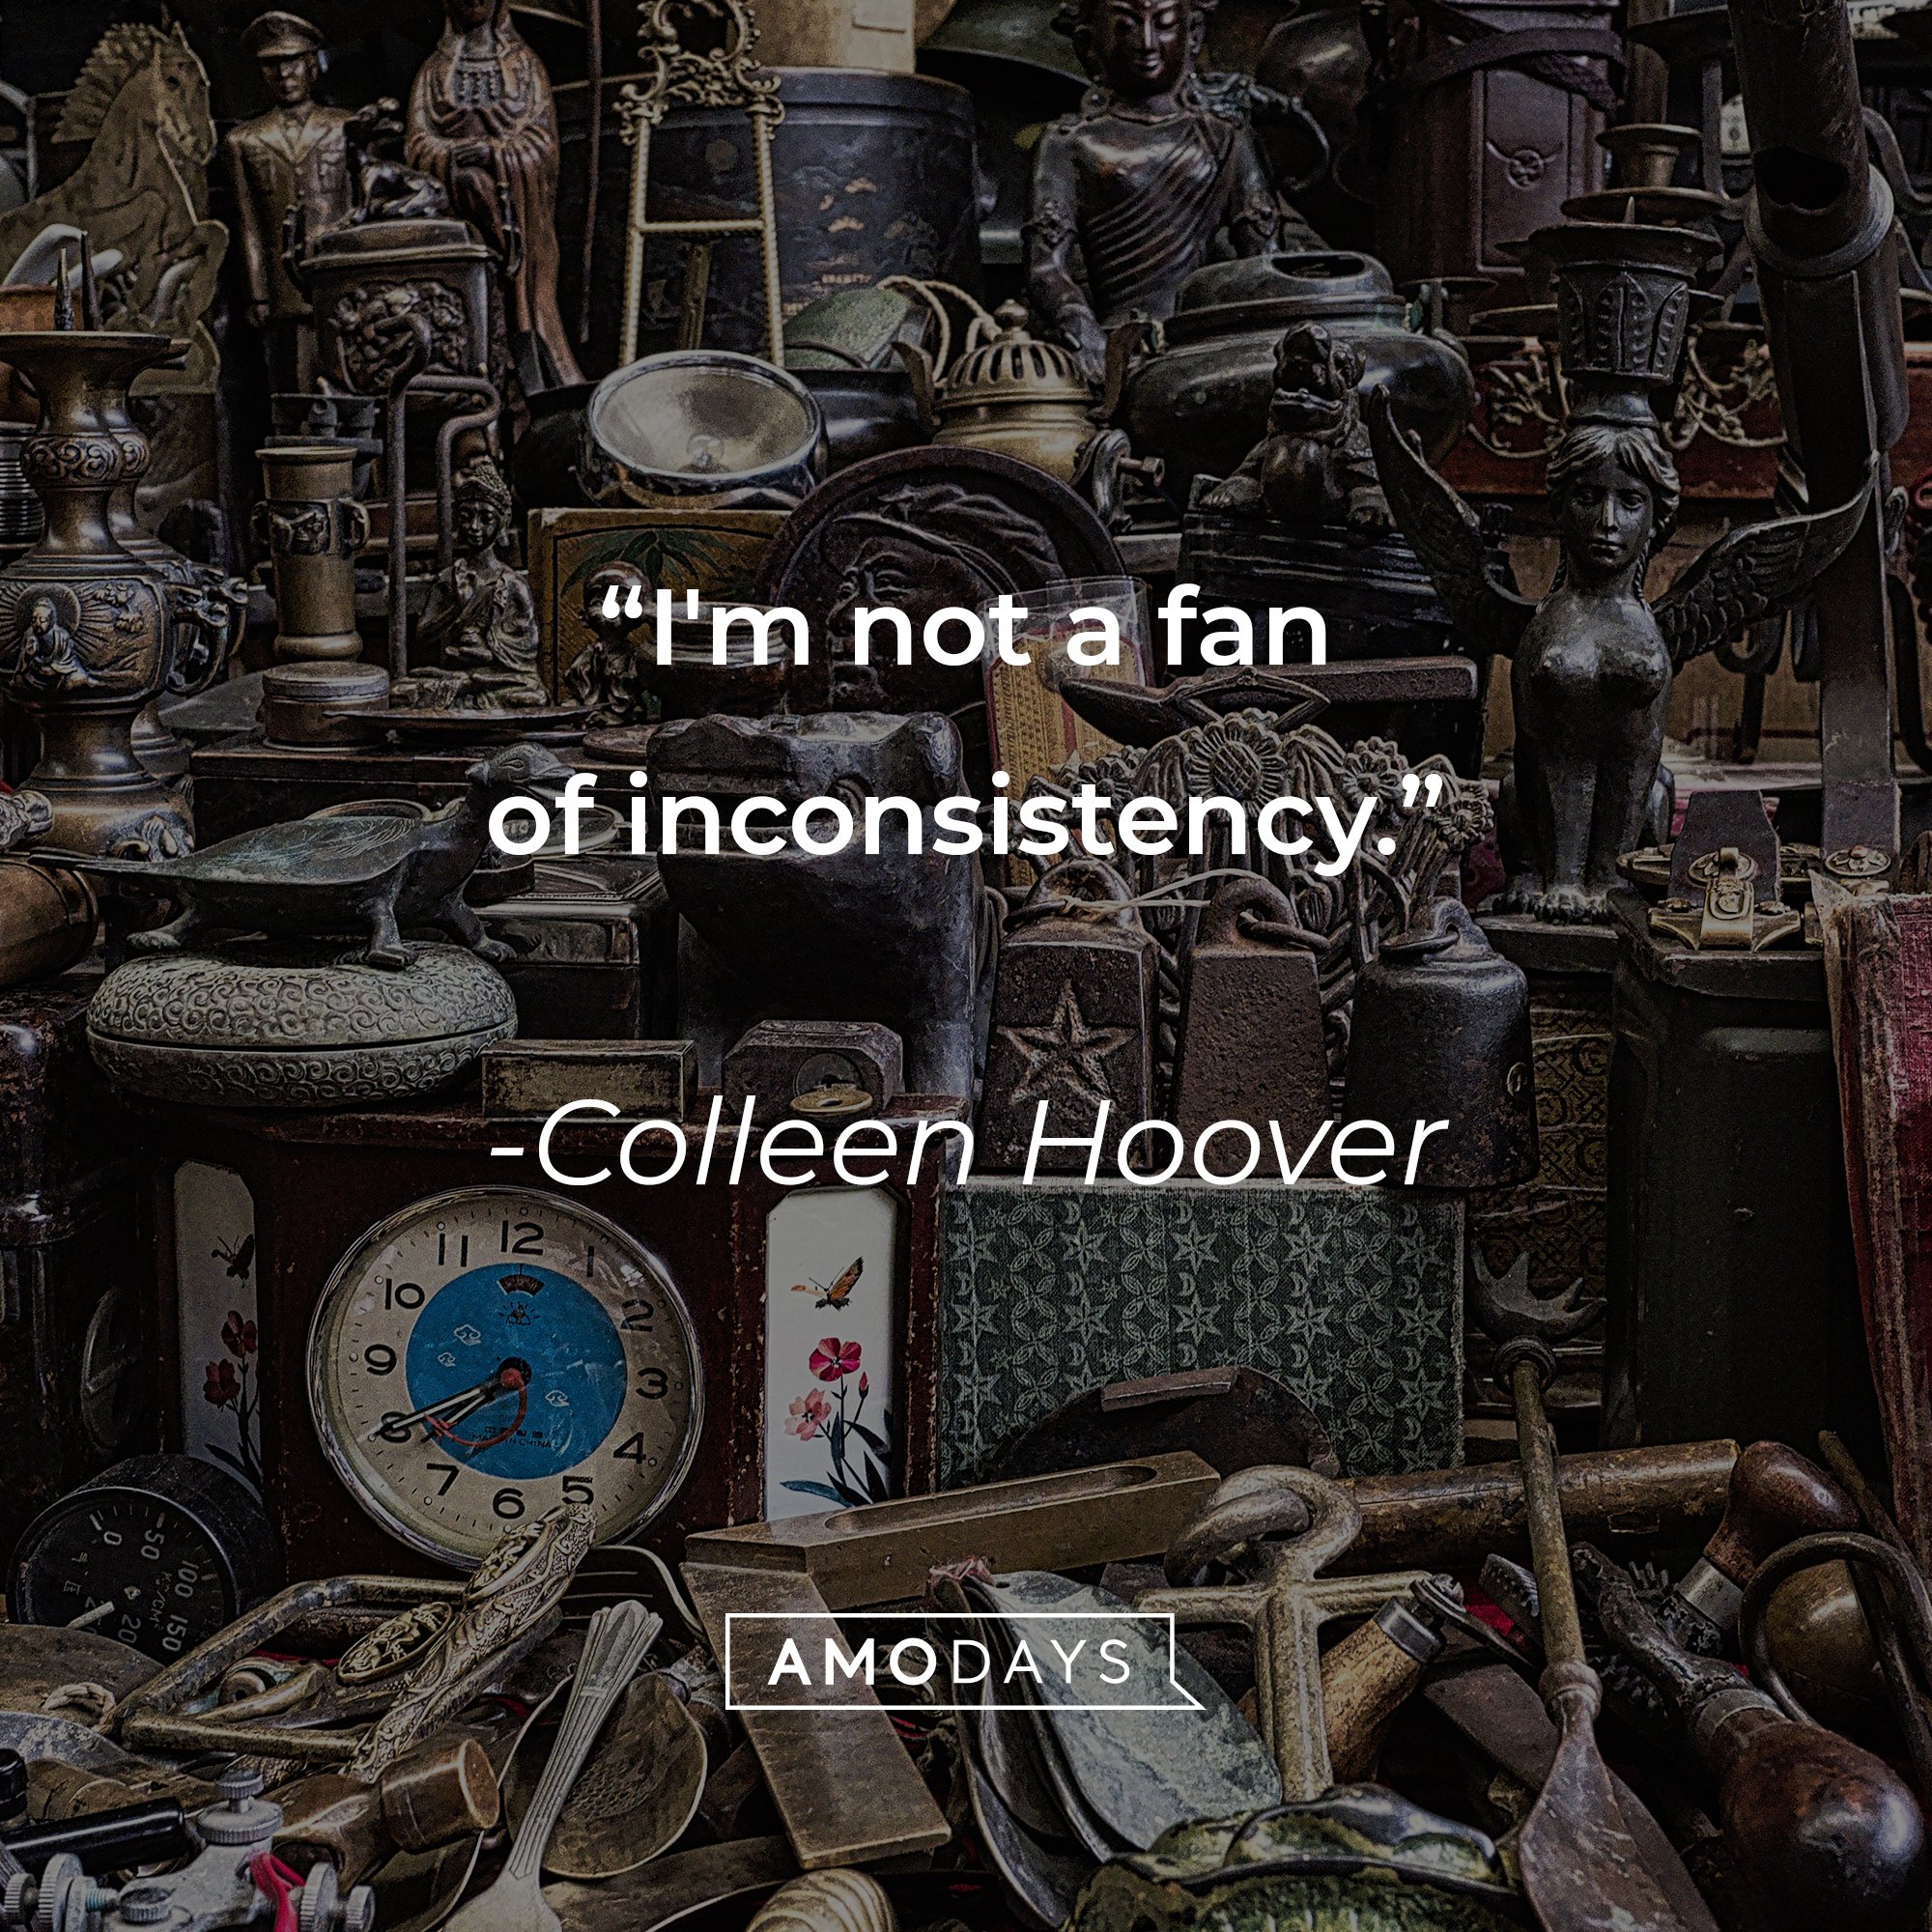 Colleen Hoover's quote: "I'm not a fan of inconsistency." | Image: AmoDays